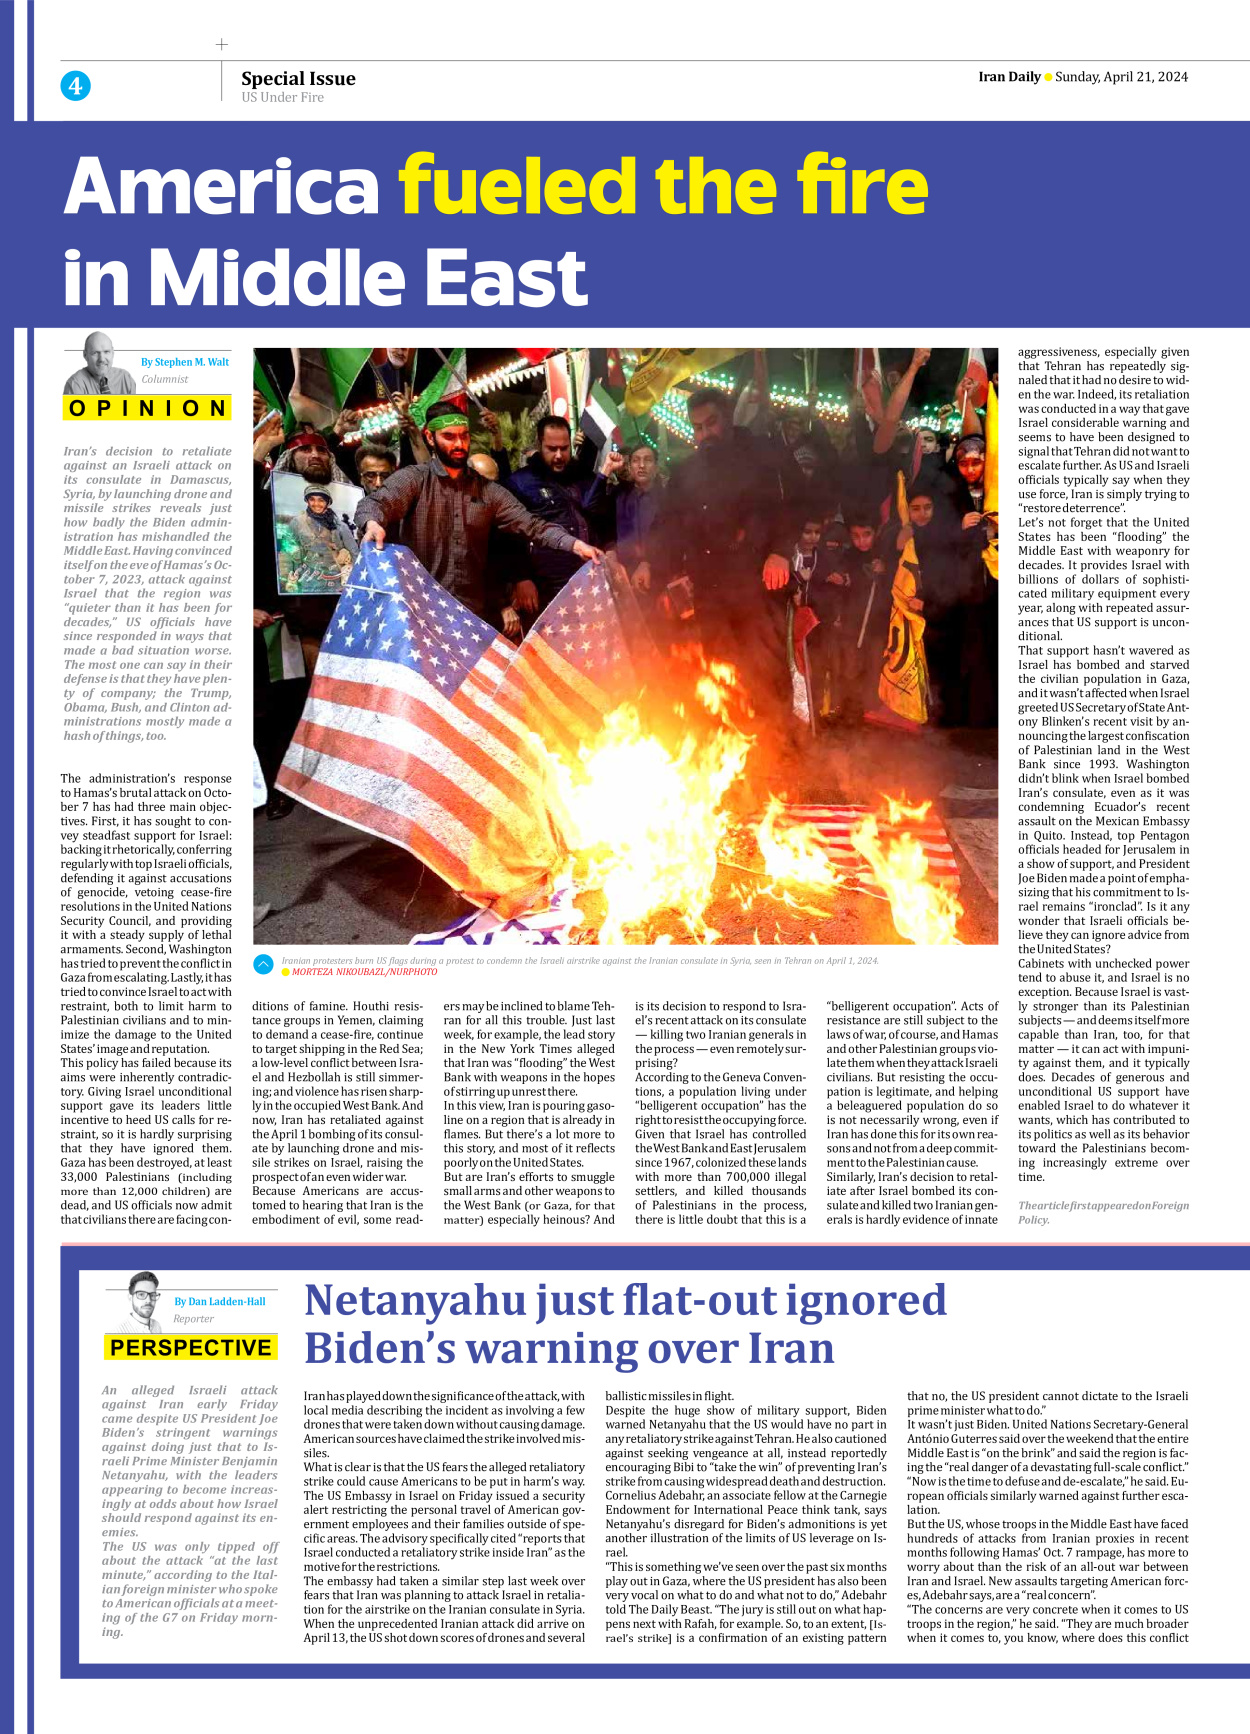 Iran Daily - Number Seven Thousand Five Hundred and Thirty Eight - 21 April 2024 - Page 4